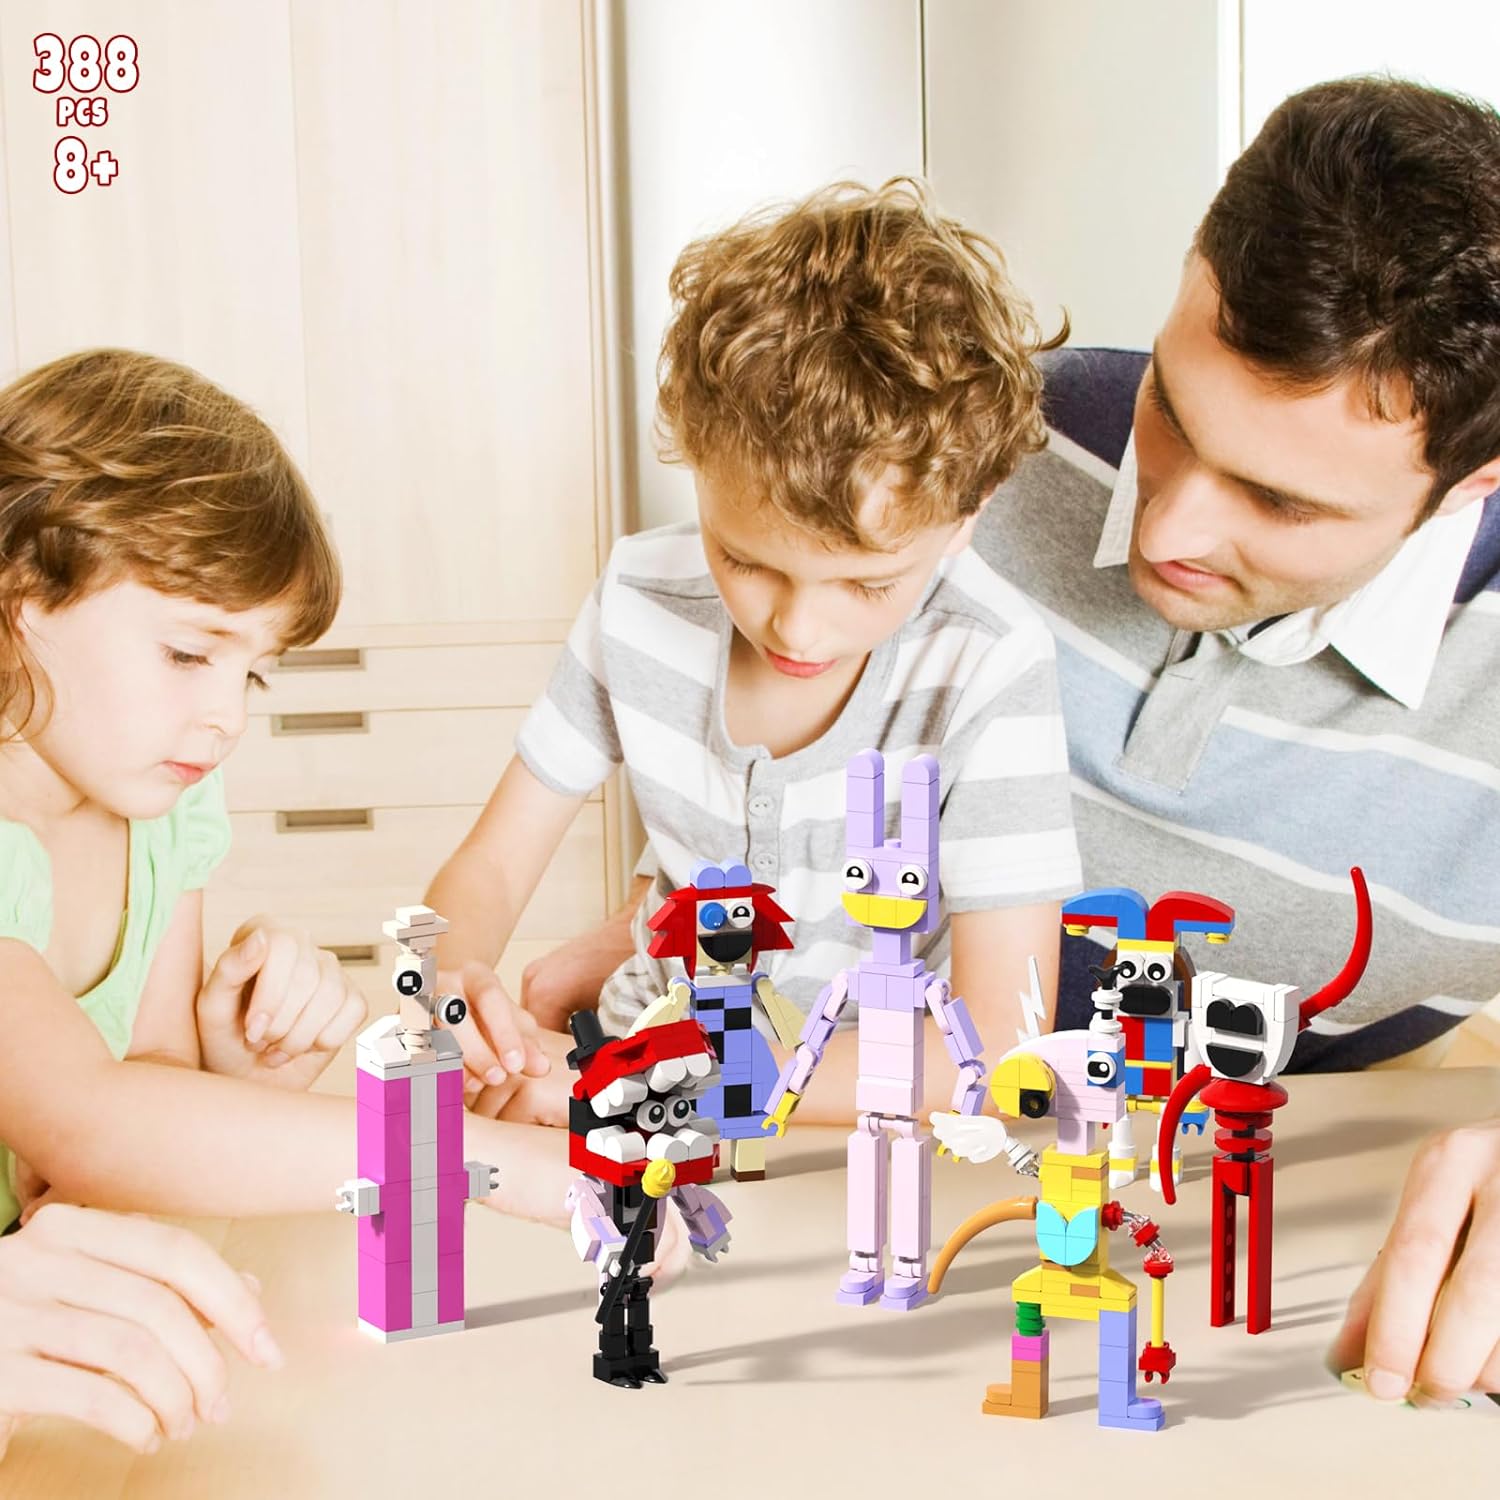 Digital Circus Building Toy Sets Compatible with Lego; Amazing Circus Pomni/Ragatha/Caine/Jaax/Gangle/Kinger/Zoooble Fgure Building Blocks - Cykapu